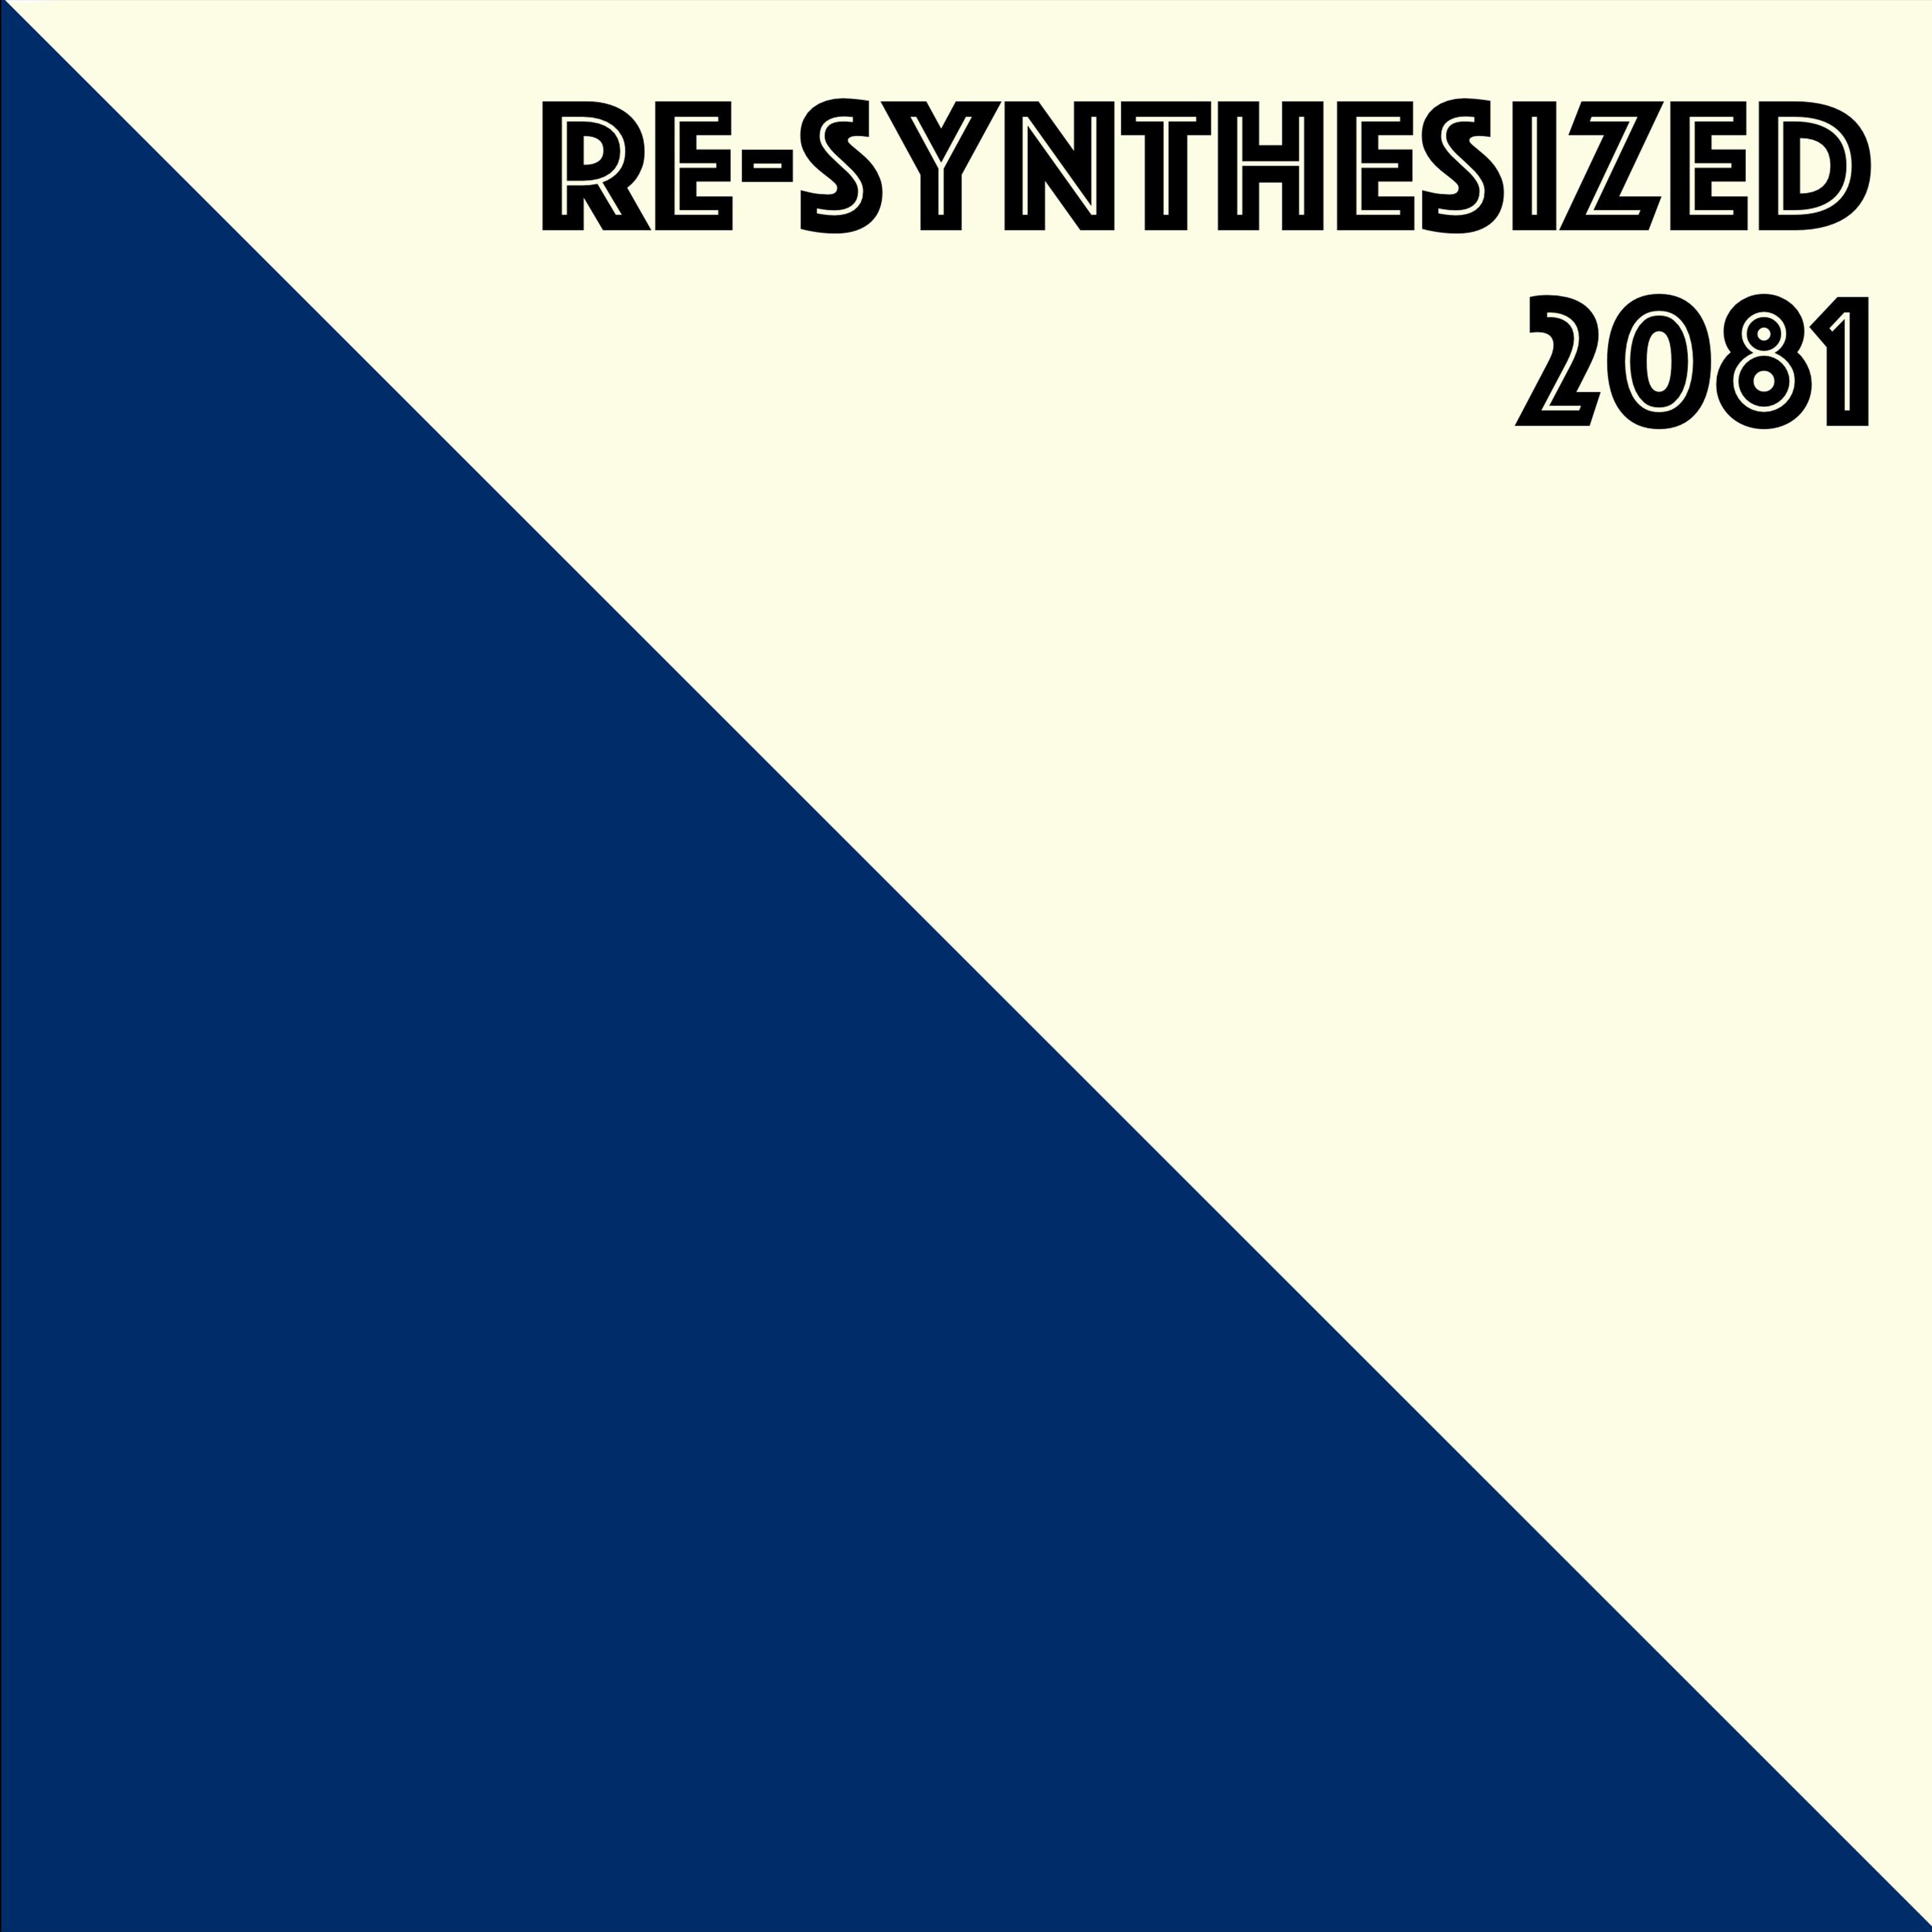 Re-Synthesized 2081